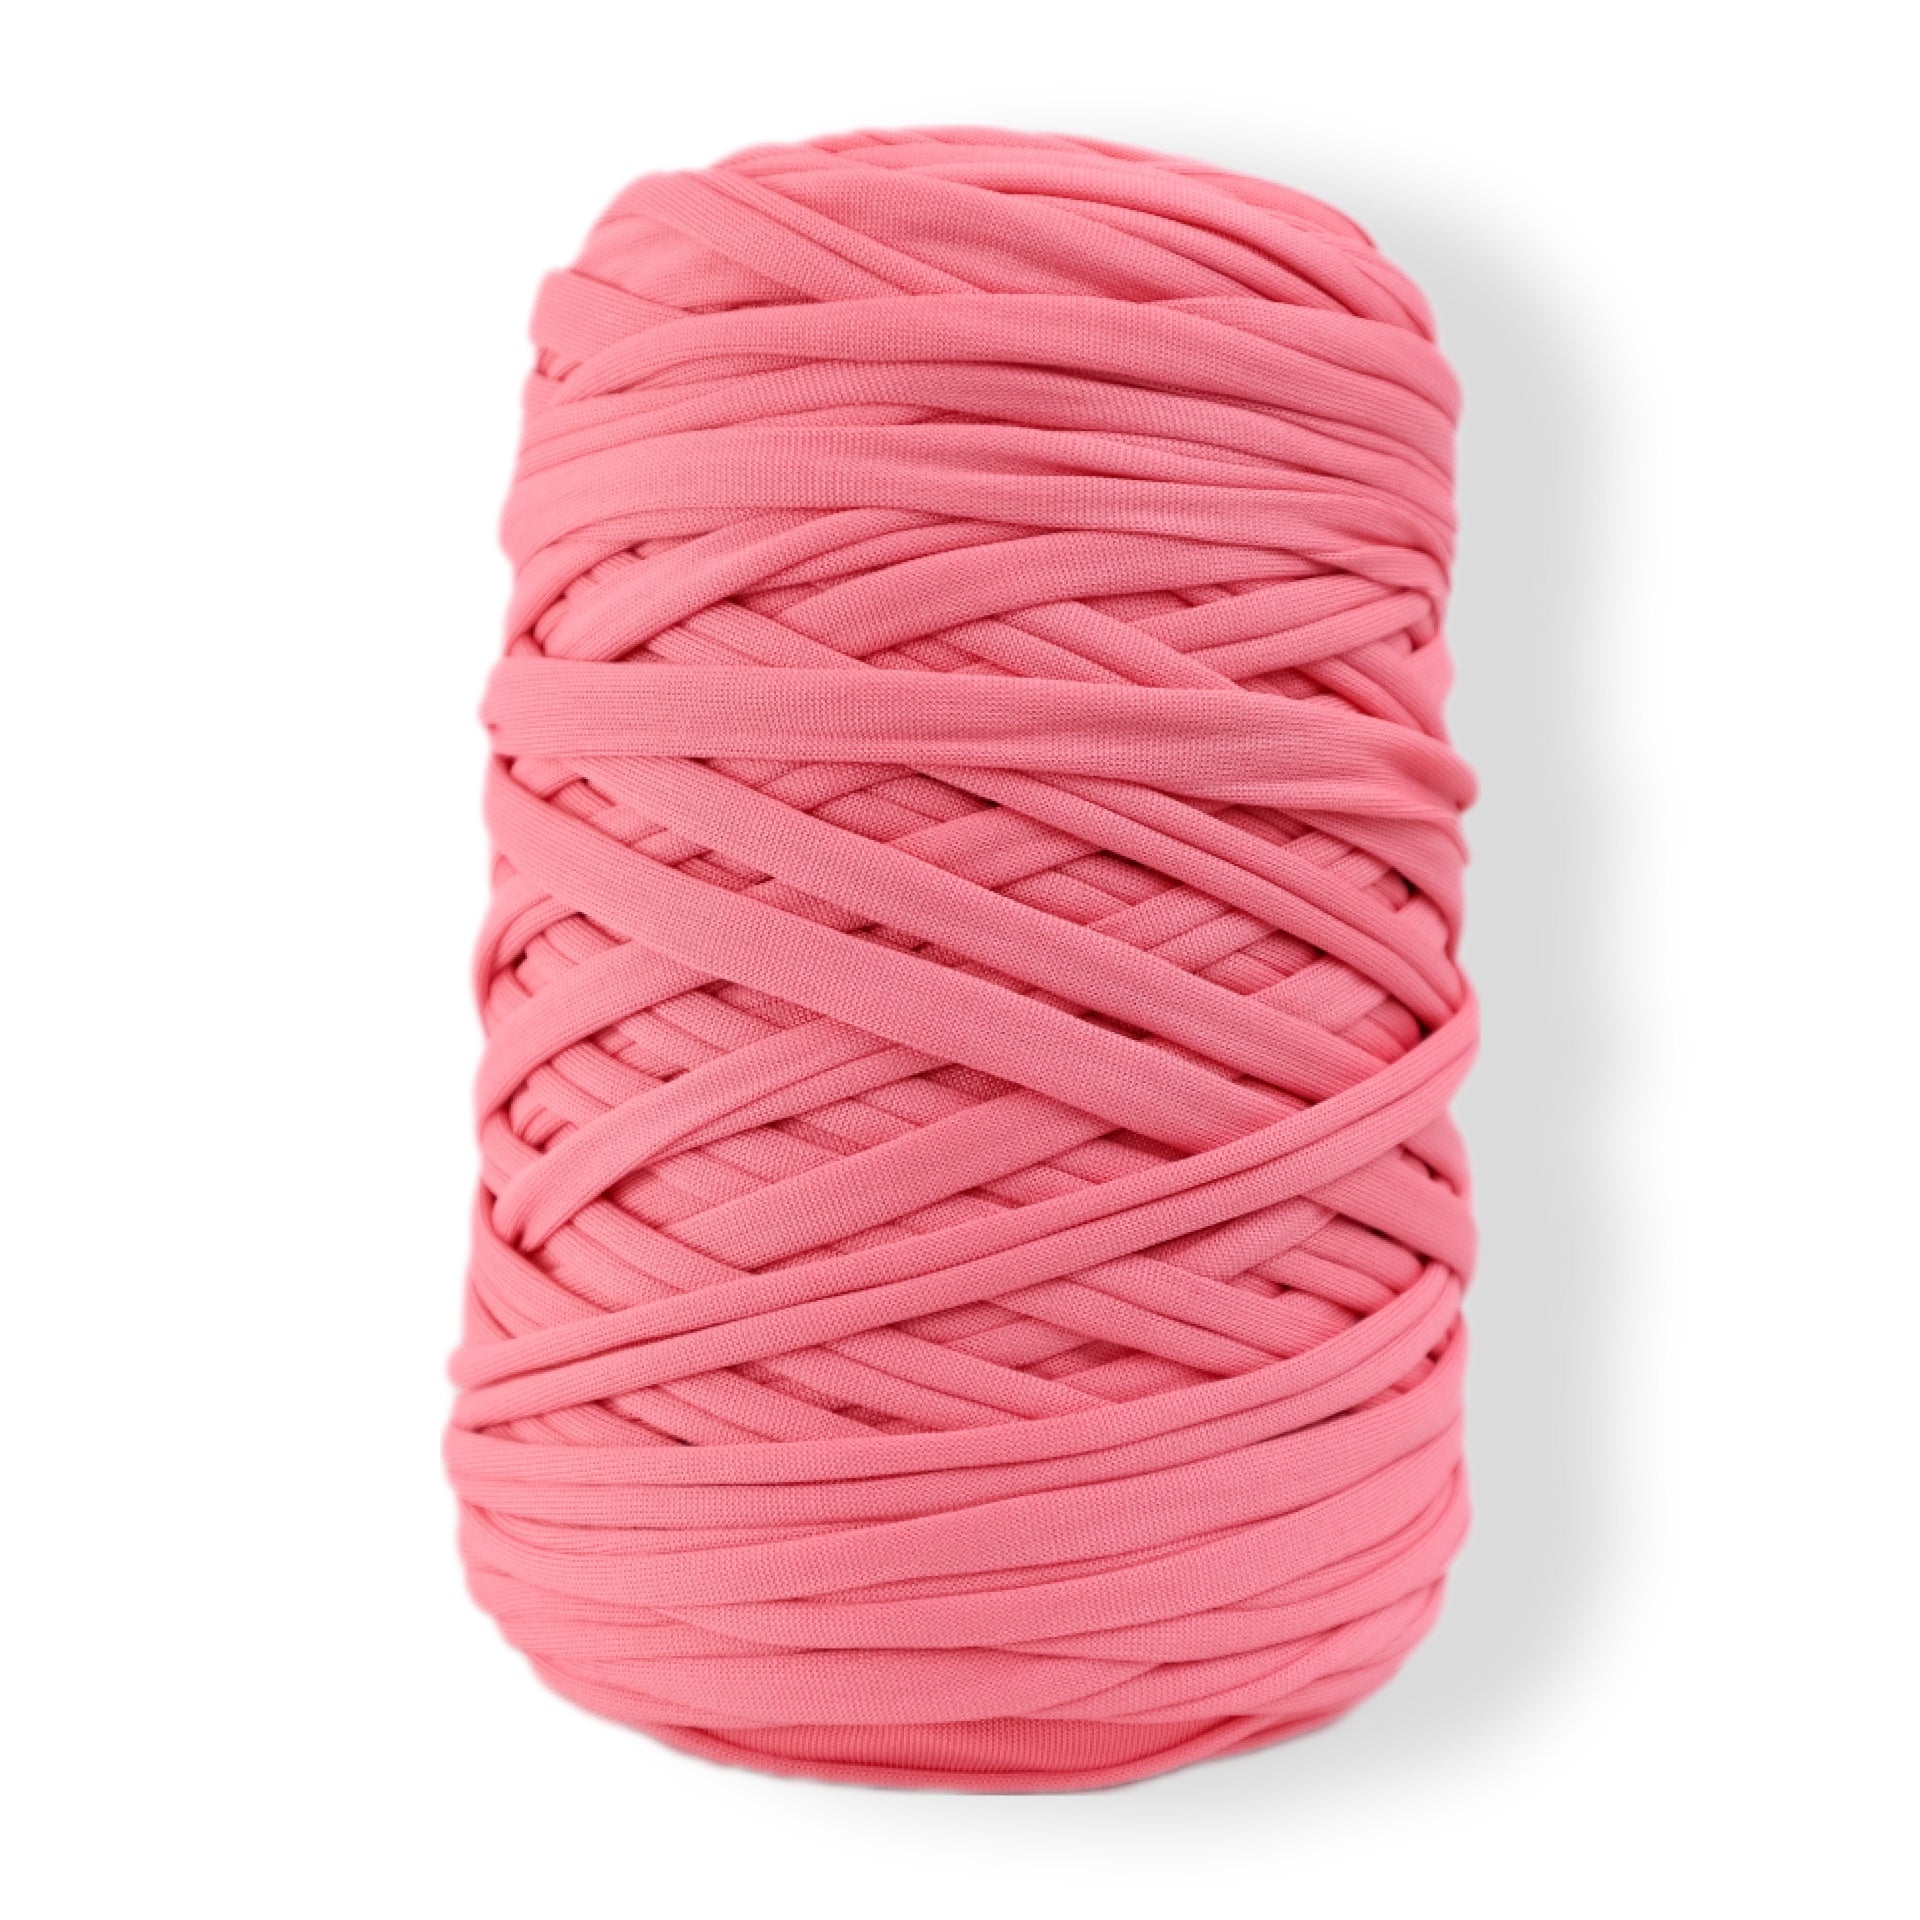 T-Shirt Yarn, Over 300 Feet, Very Soft Polyester Elastic Non